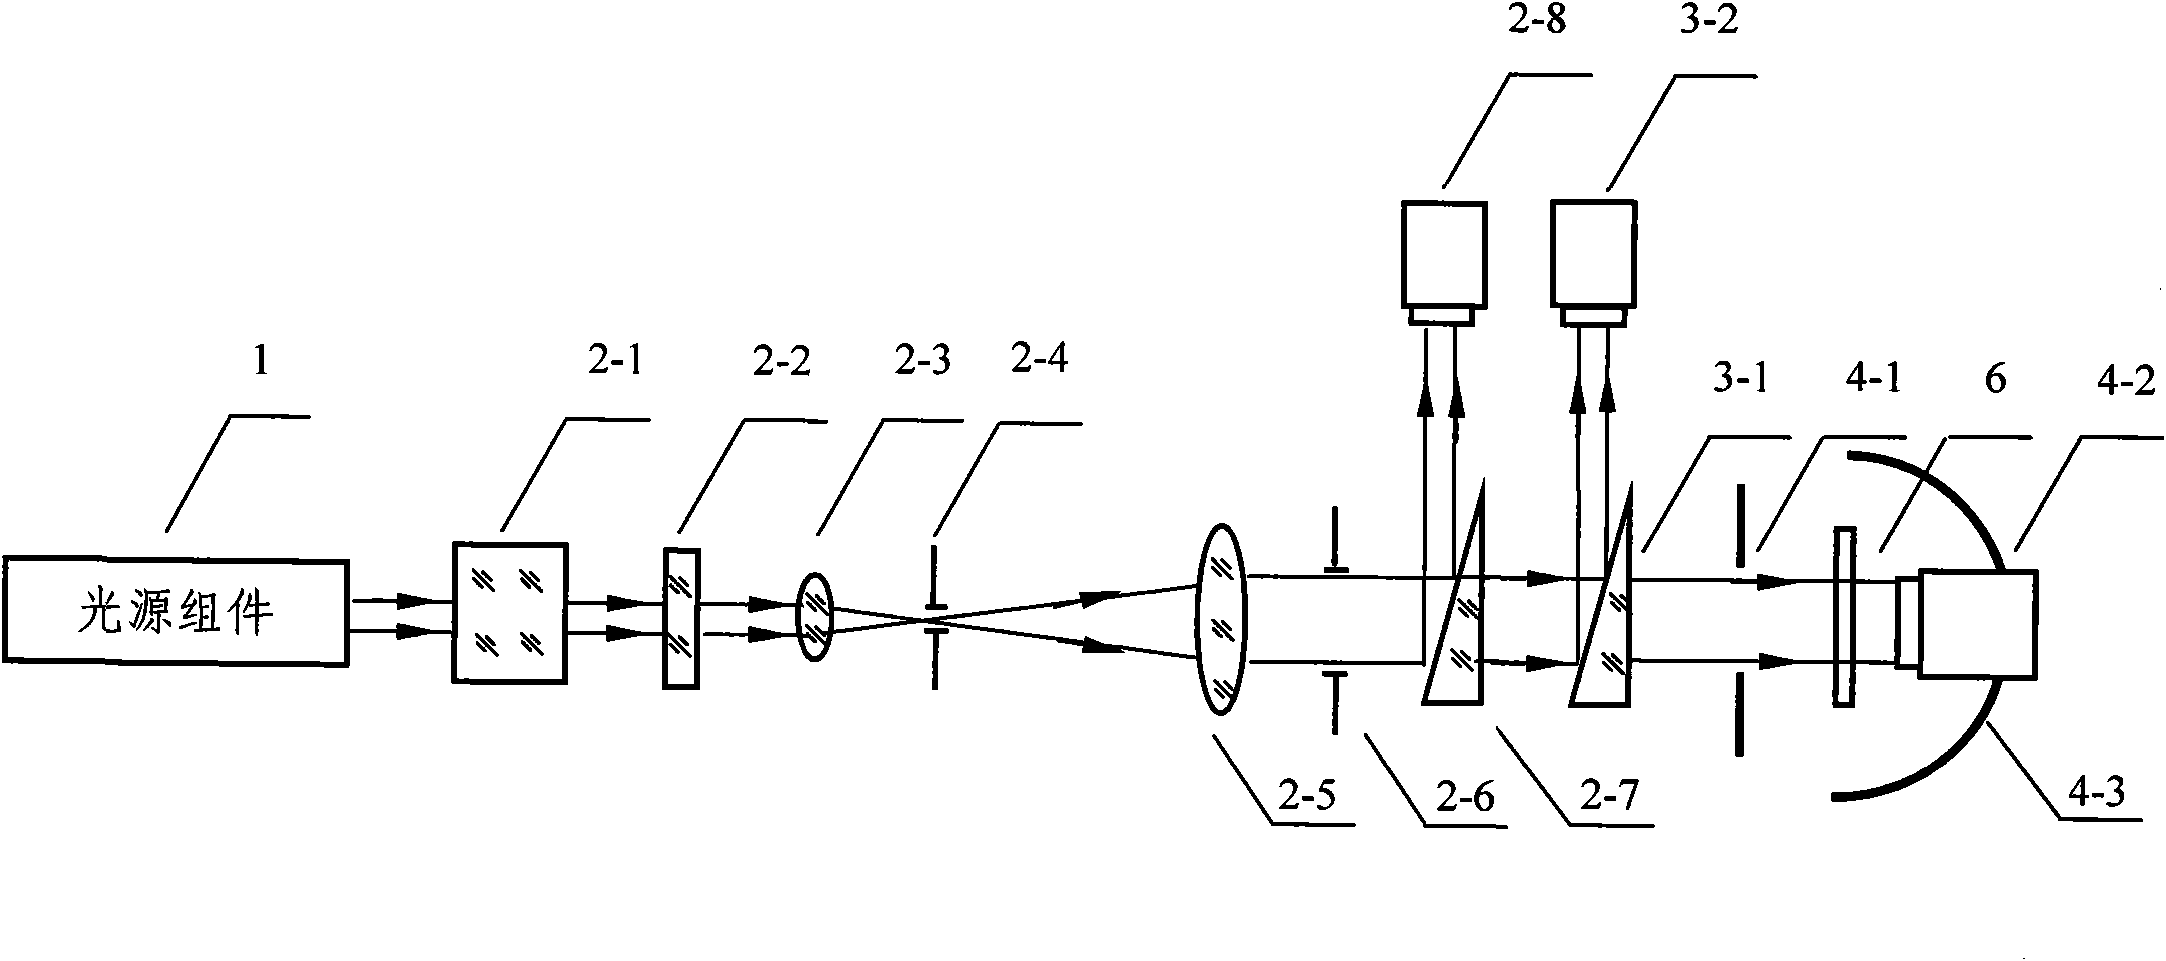 Optical measuring device with high reflectivity and high transmissivity